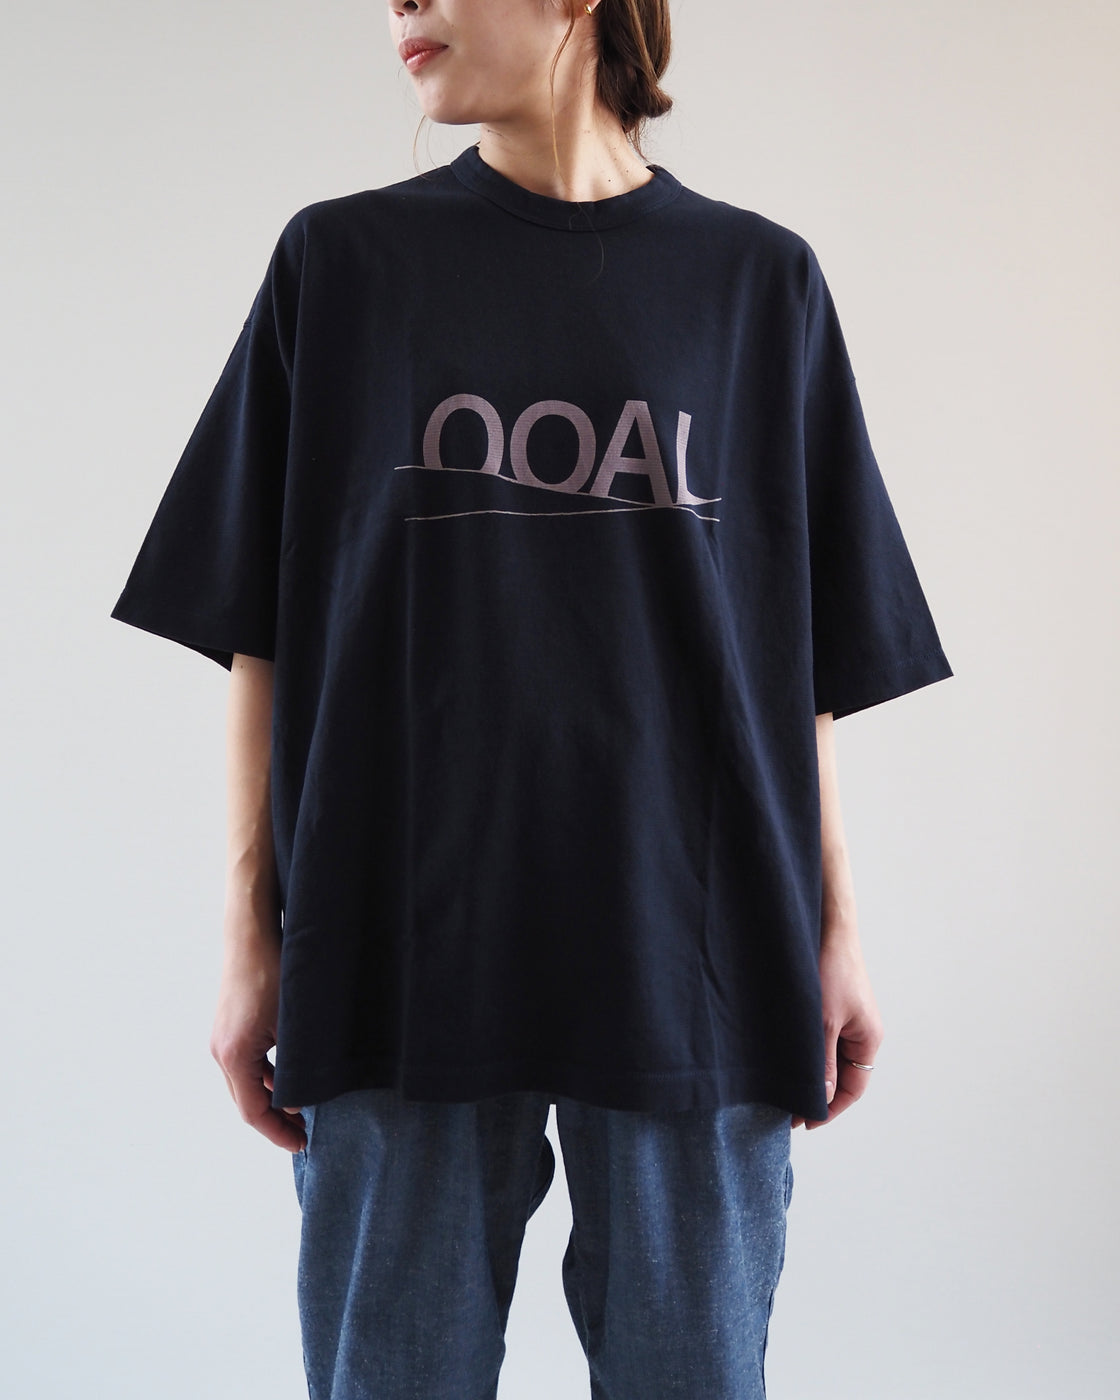 All Oversize Tees, Navy